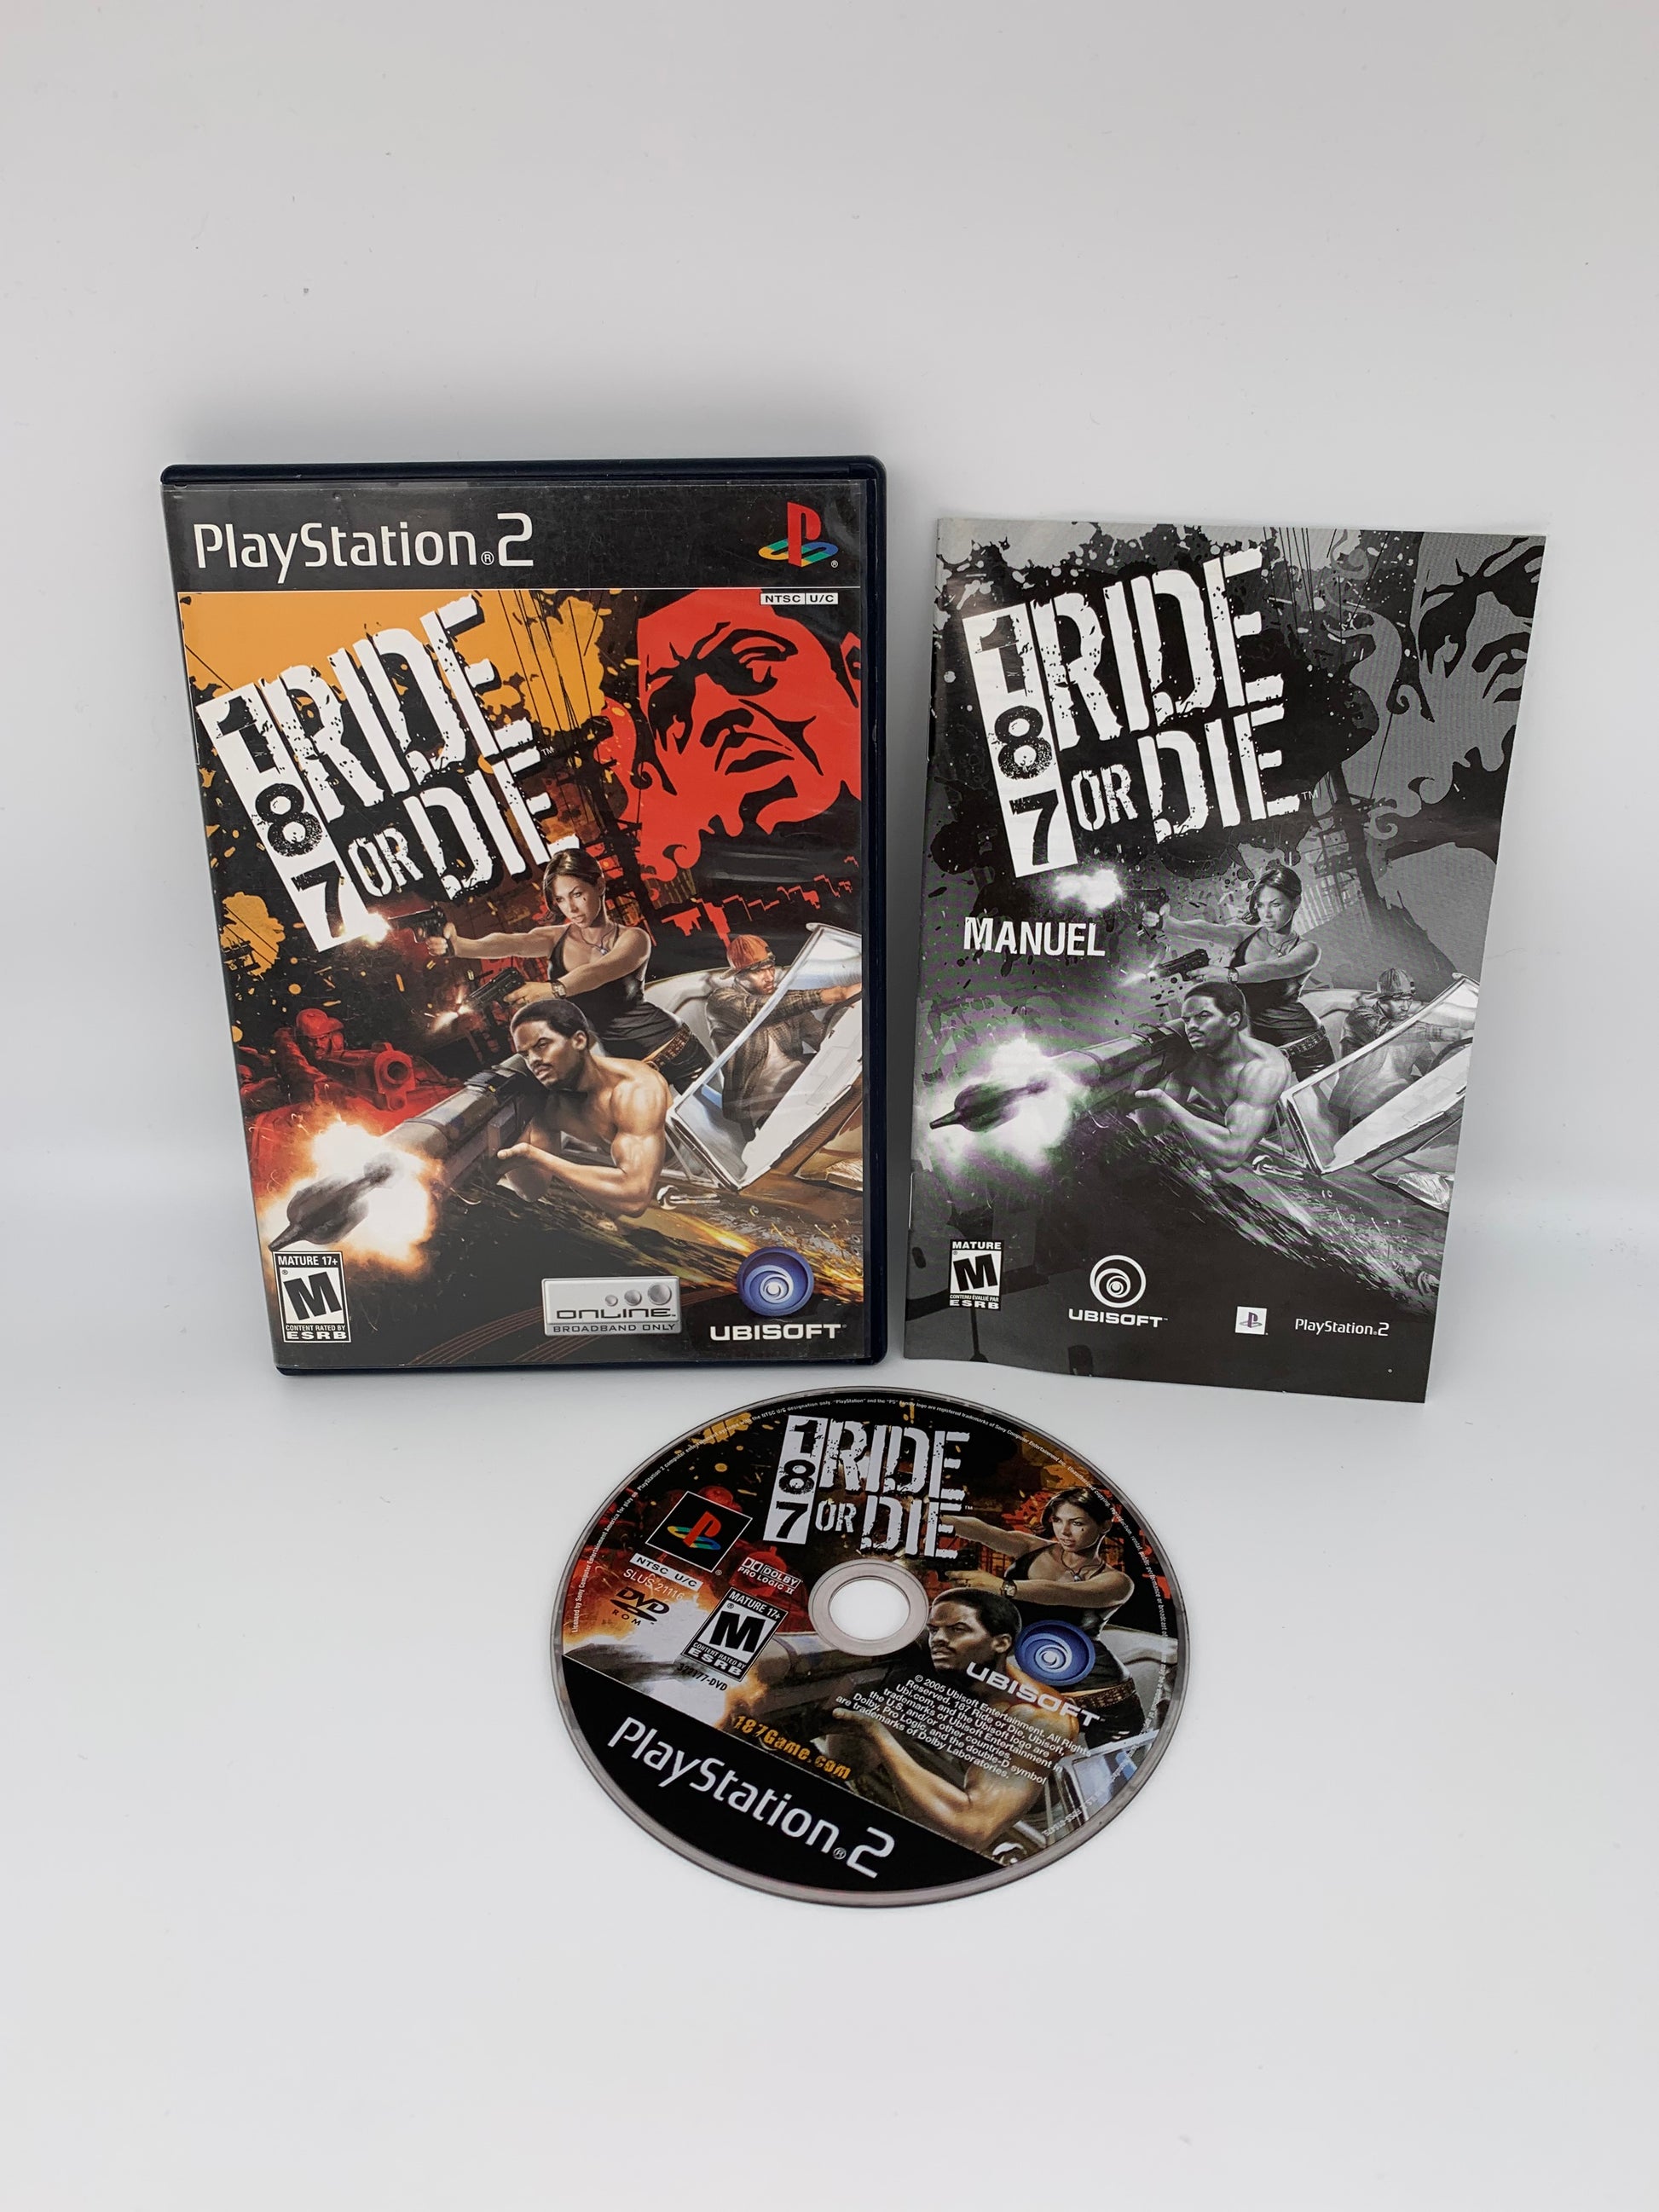 PiXEL-RETRO.COM : SONY PLAYSTATION 2 (PS2) COMPLET CIB BOX MANUAL GAME NTSC 187 RIDE OR DIE